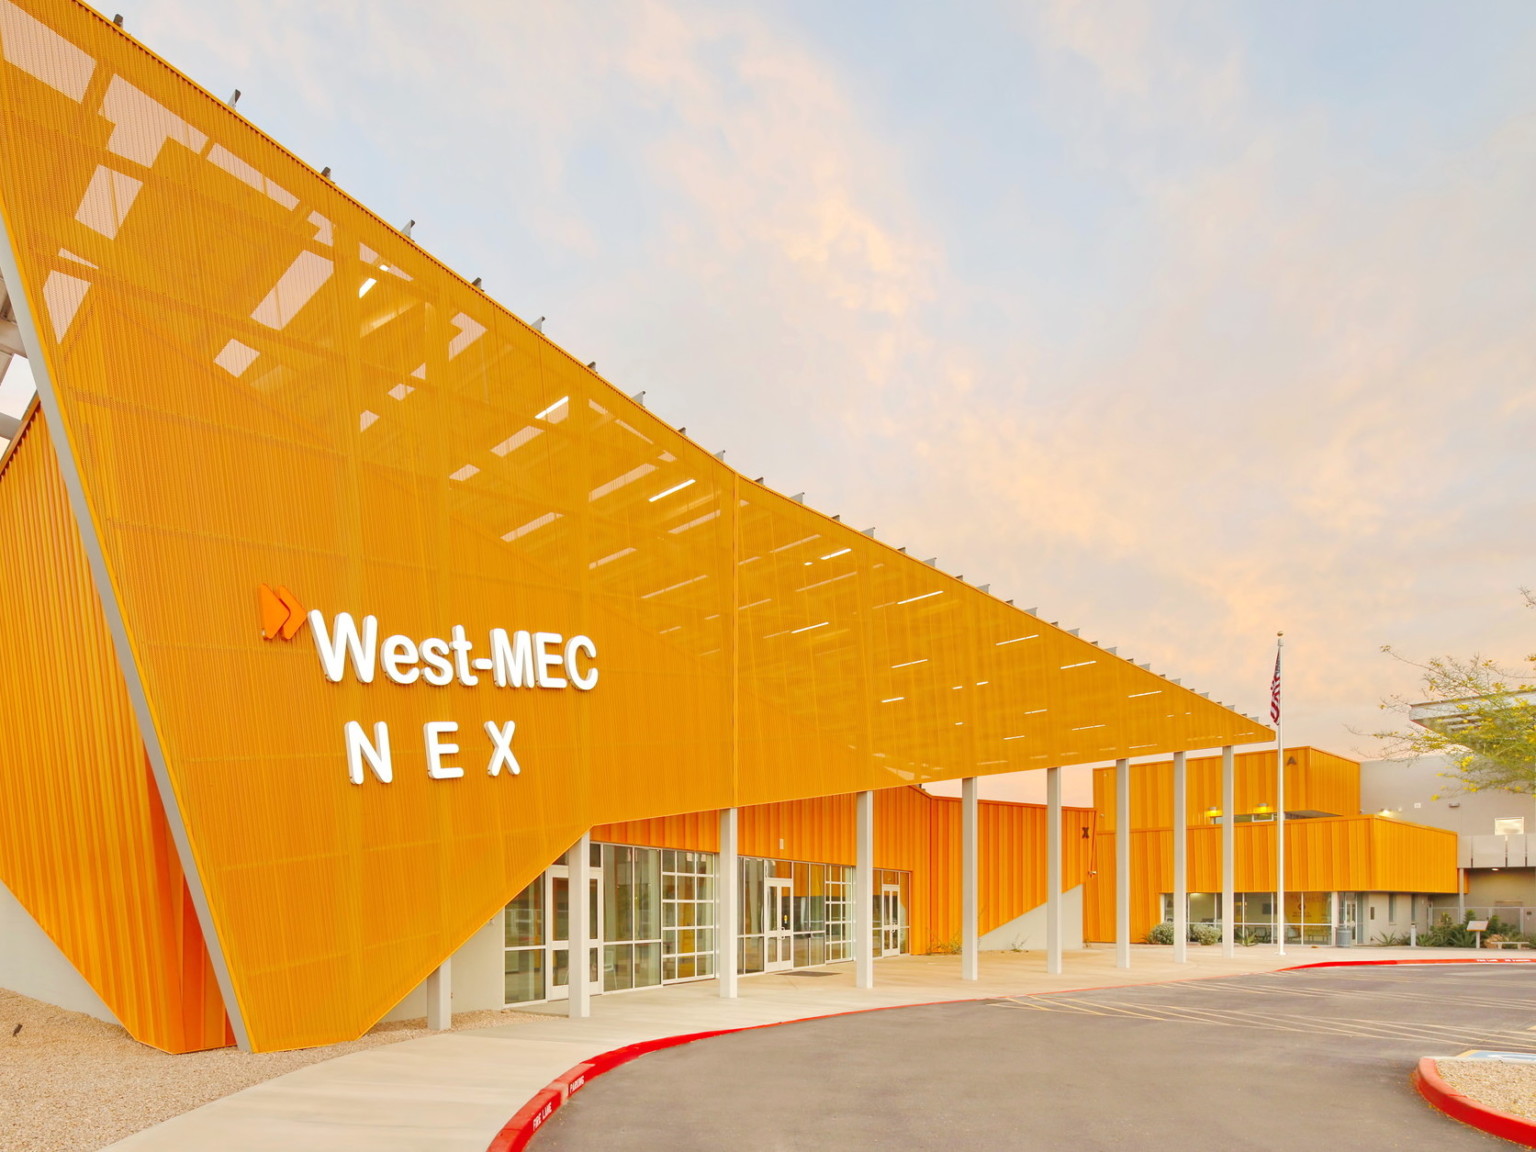 West-MEC NEX building at the Southwest Campus, an angular yellow building with sunscreen across the front with white sign